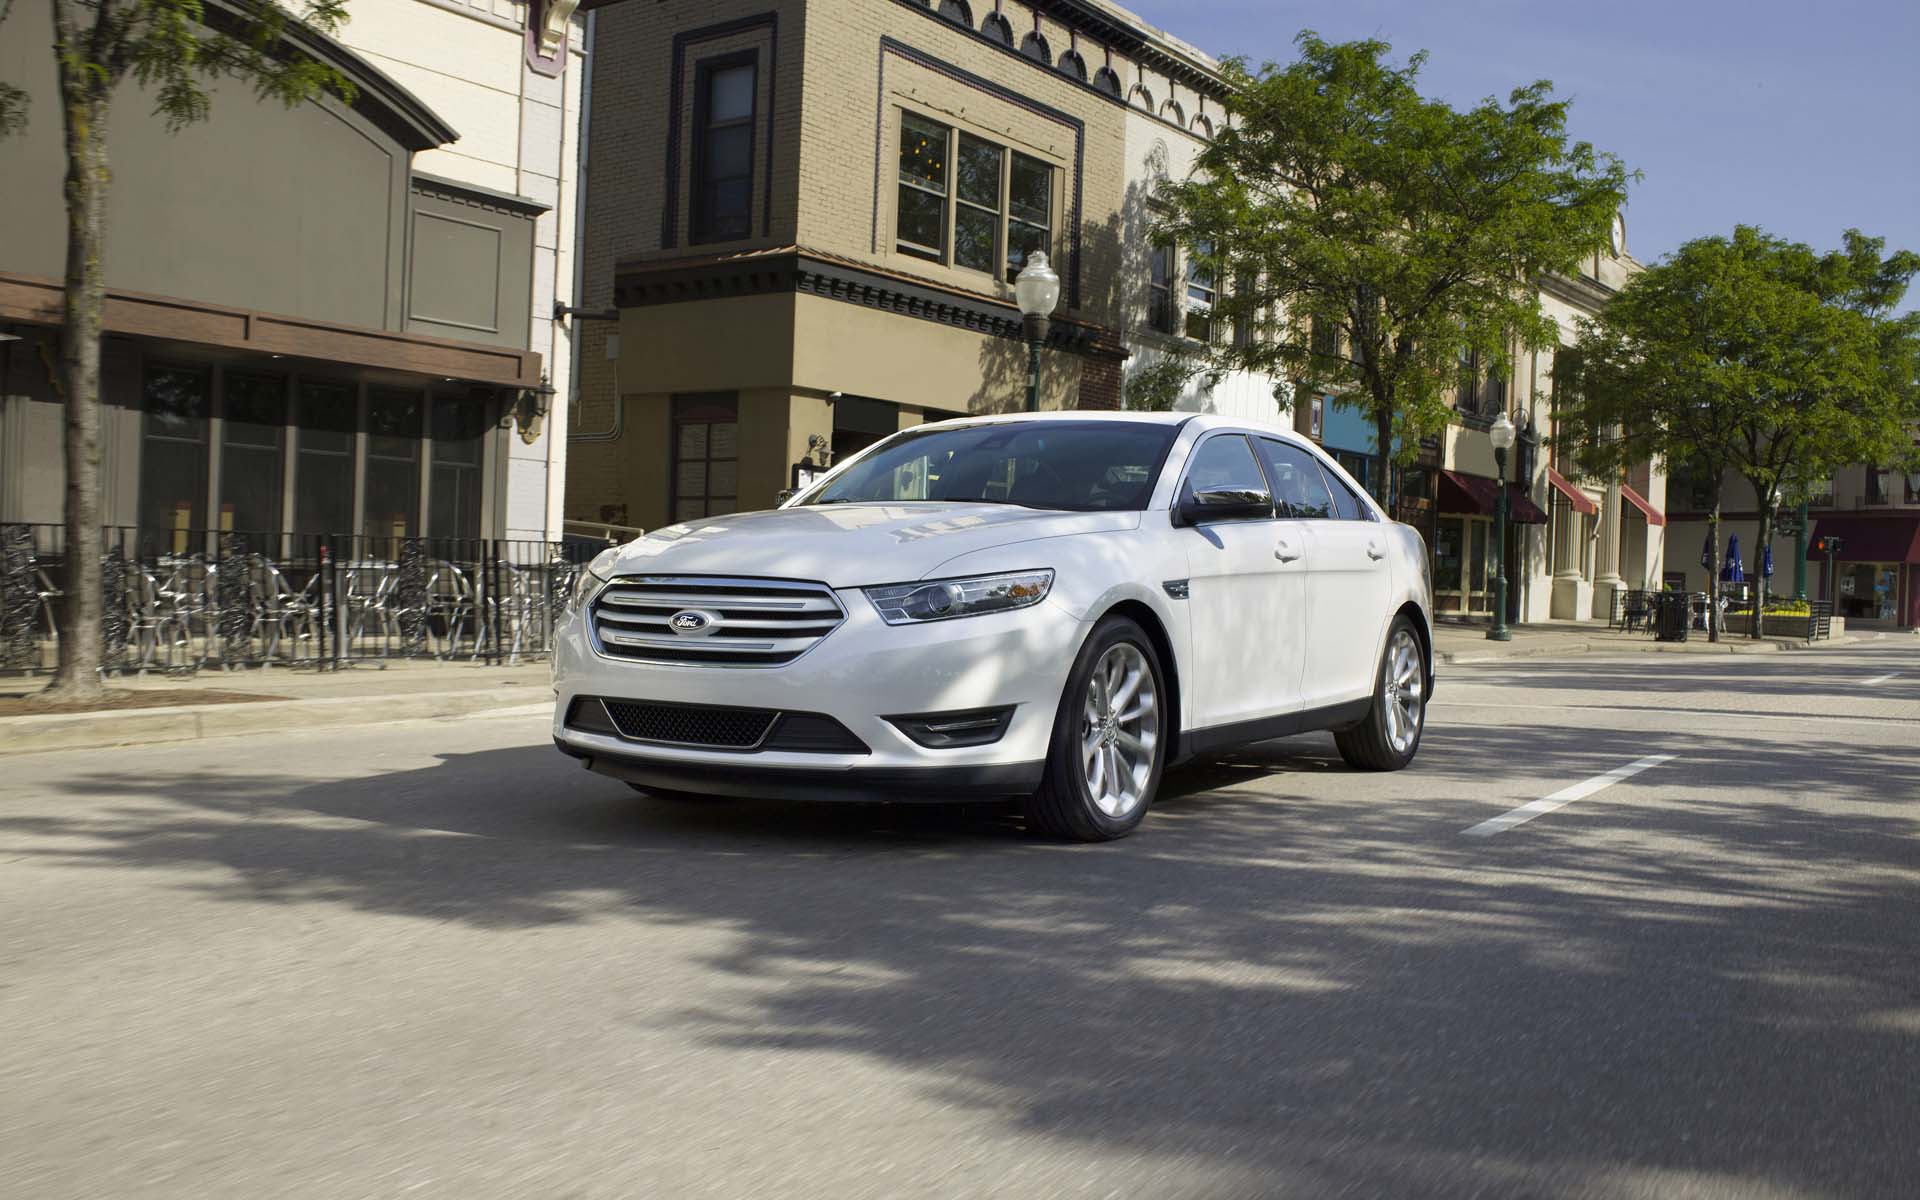 2017 Ford Taurus Review, Ratings, Specs, Prices, and Photos - The Car